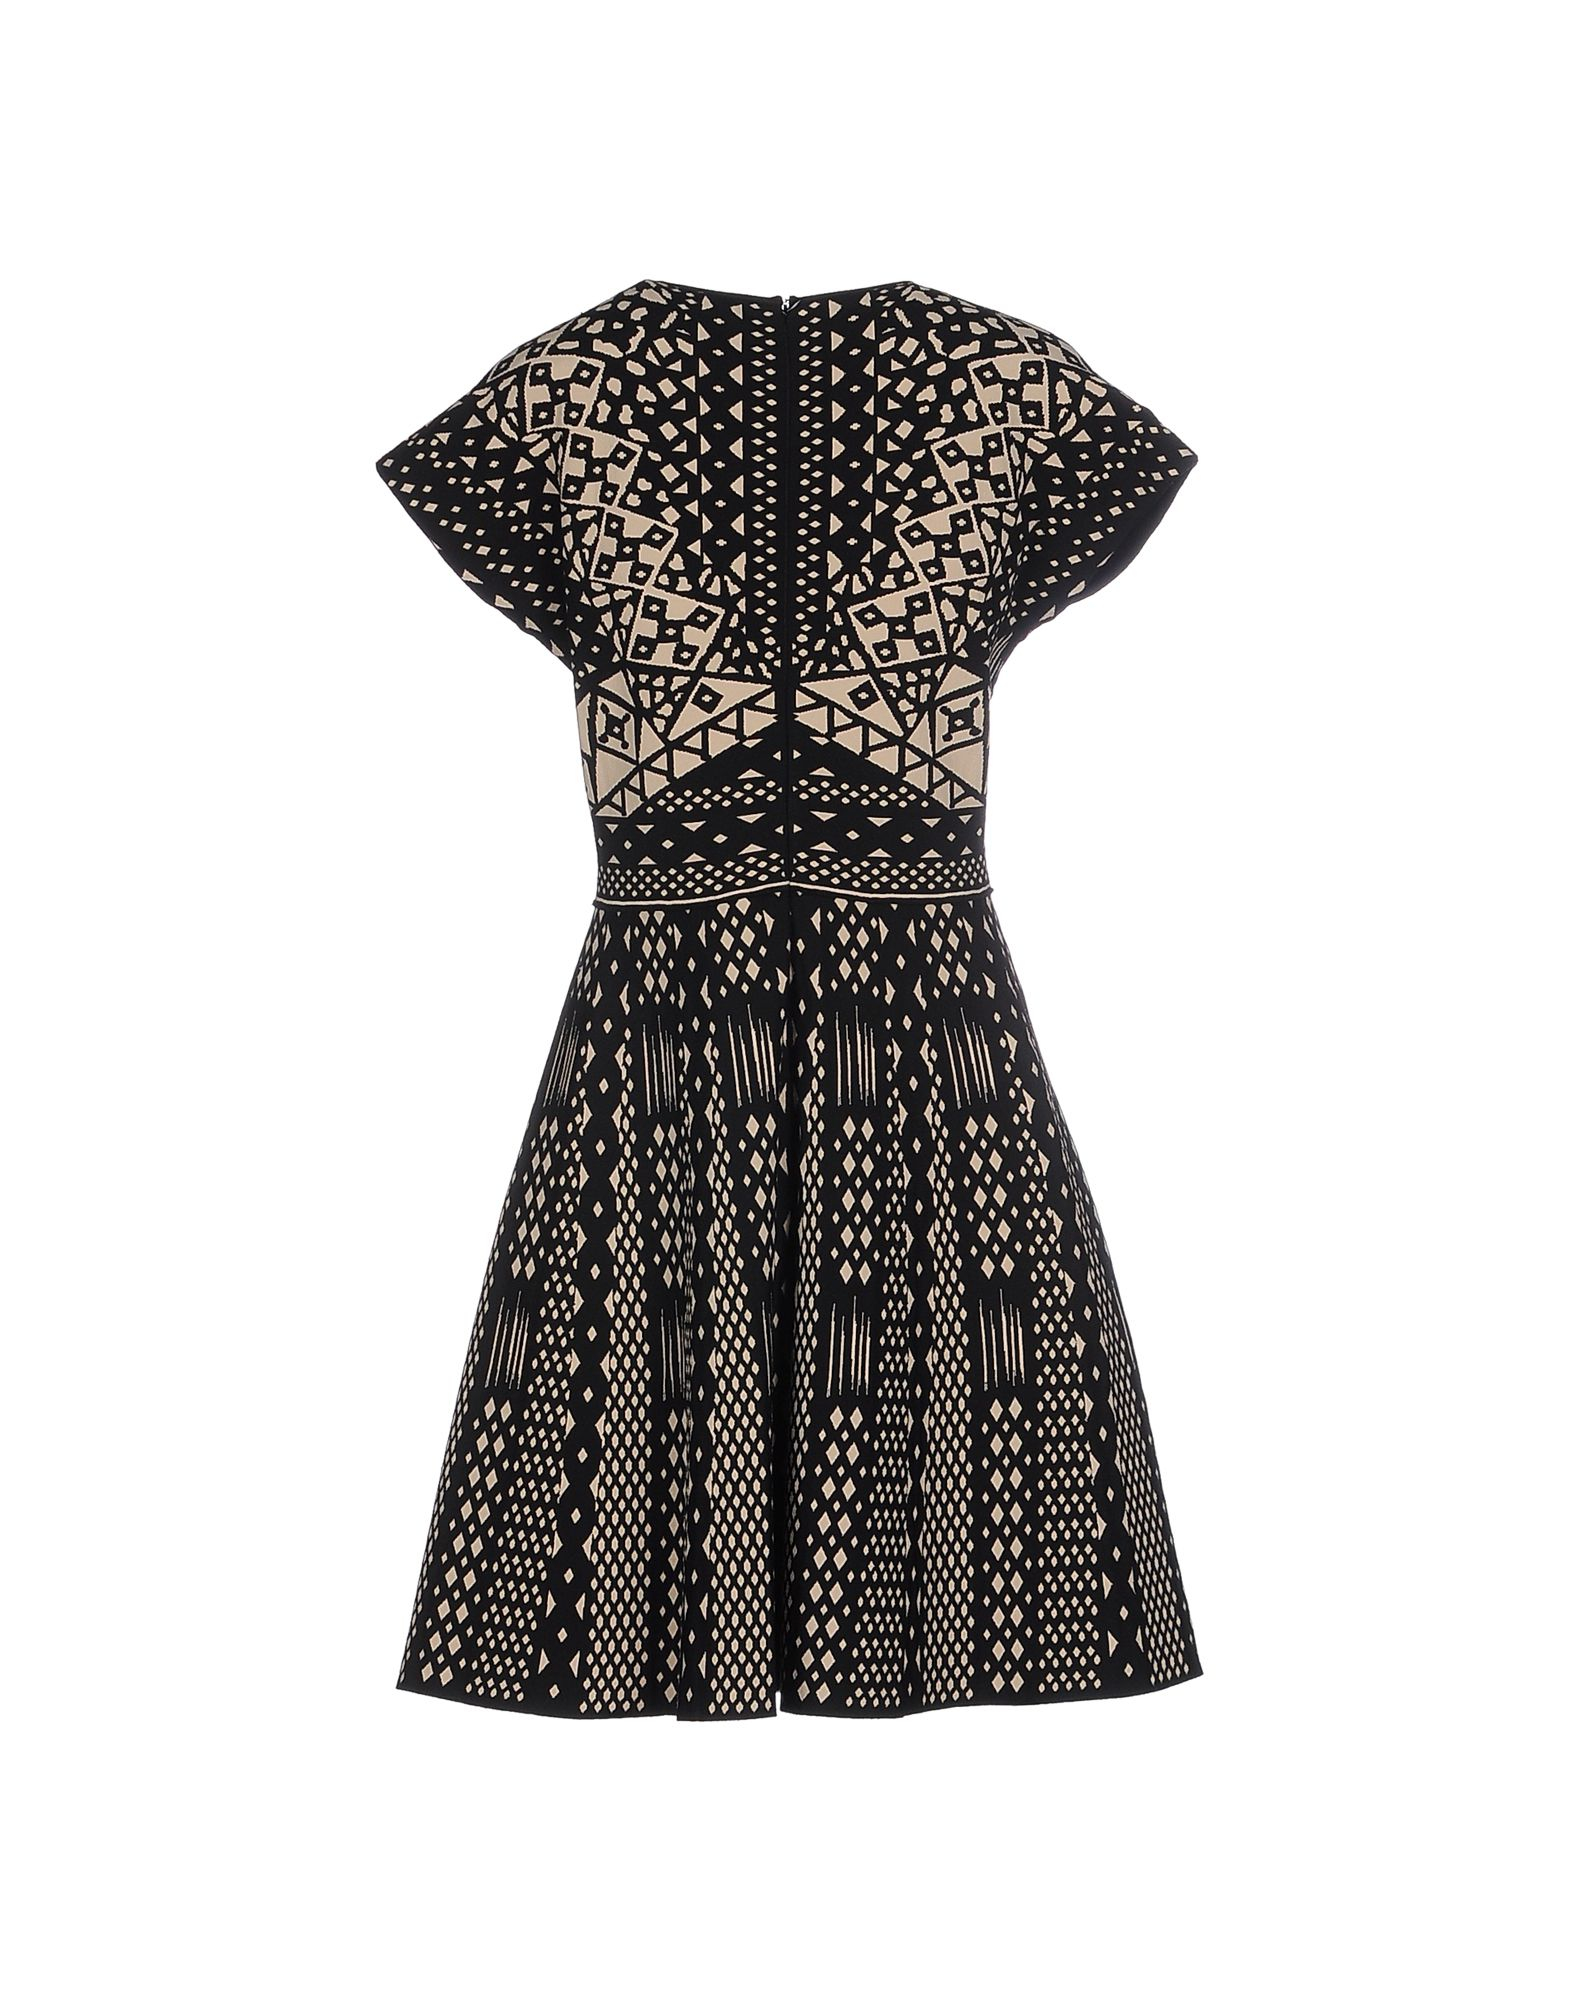 Lyst - Valentino Patterned Dress in Black